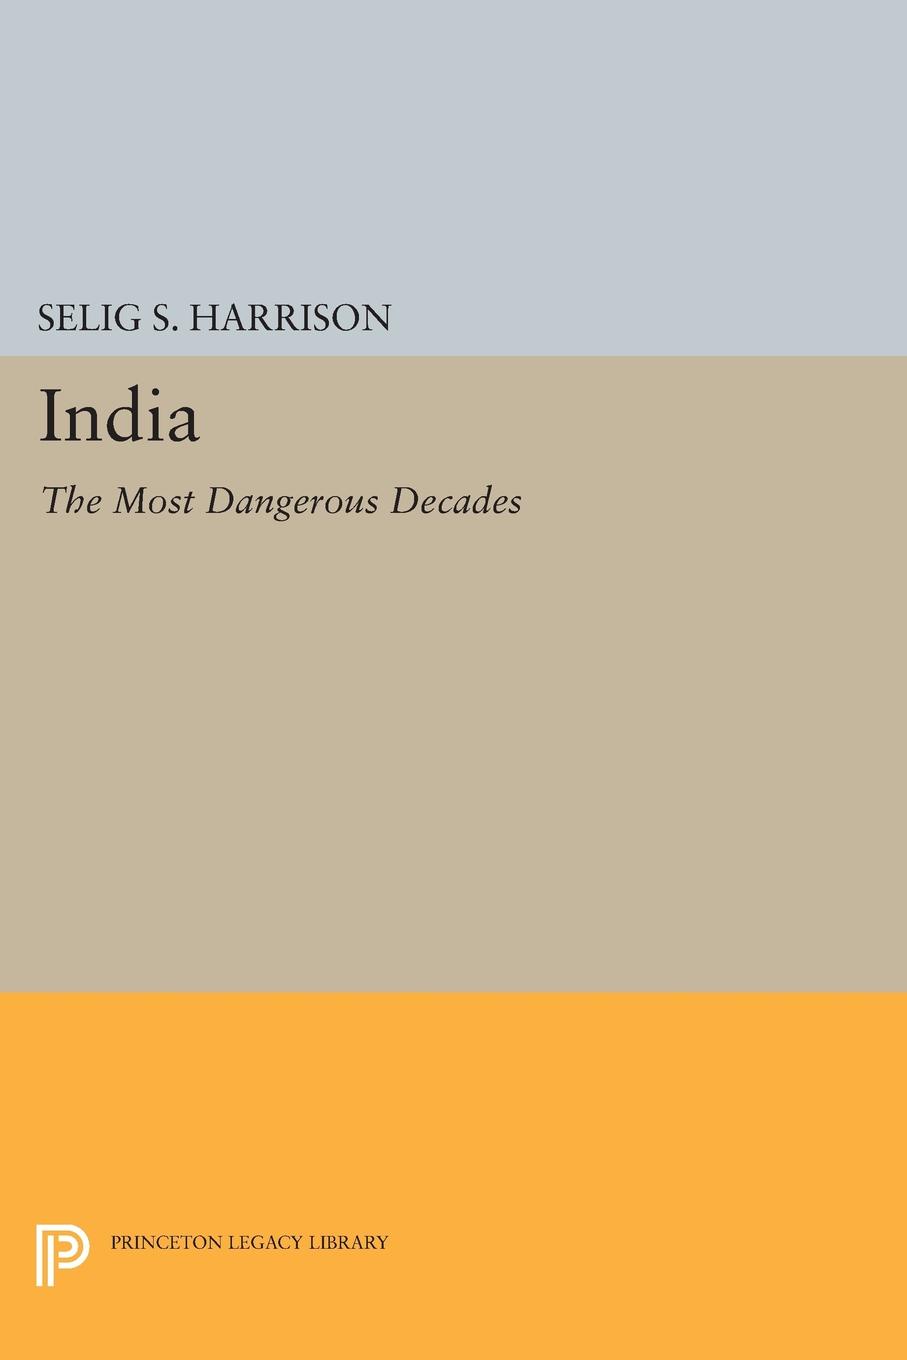 India. The Most Dangerous Decades